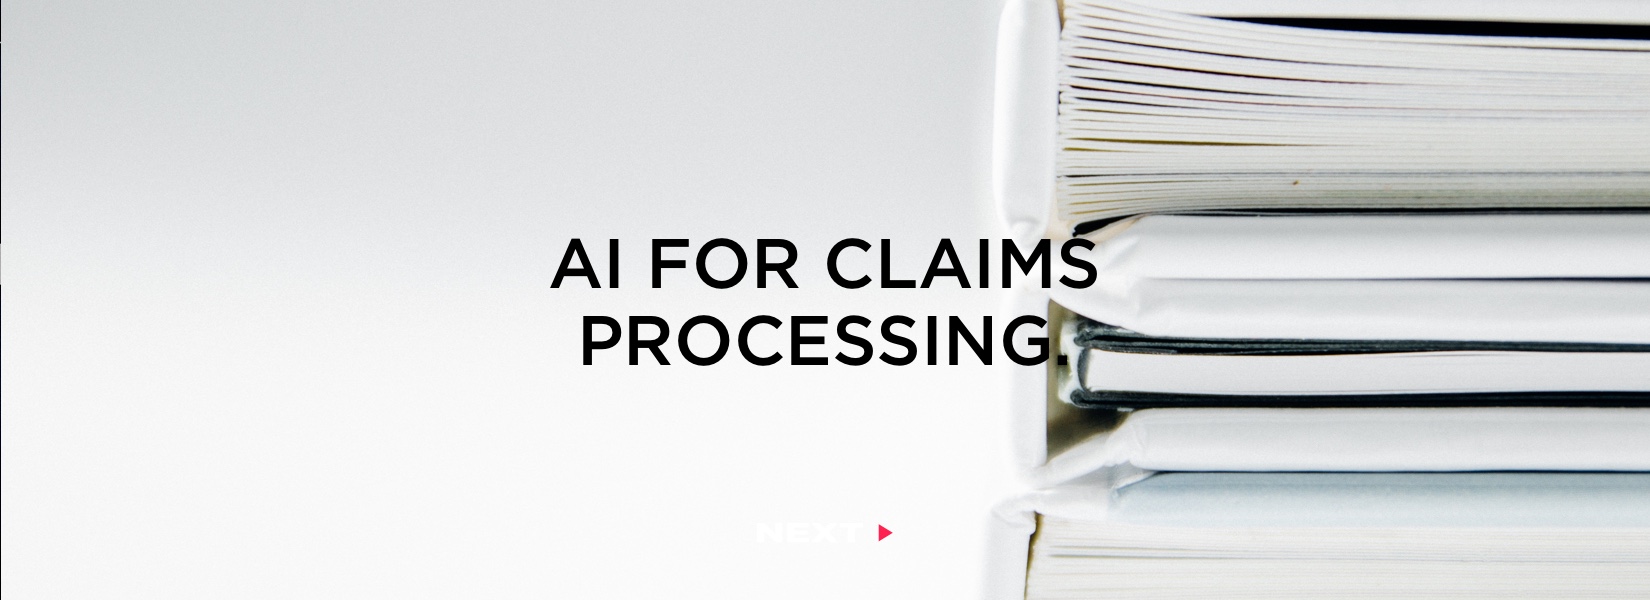 Using Artificial Intelligence to improve claims processing